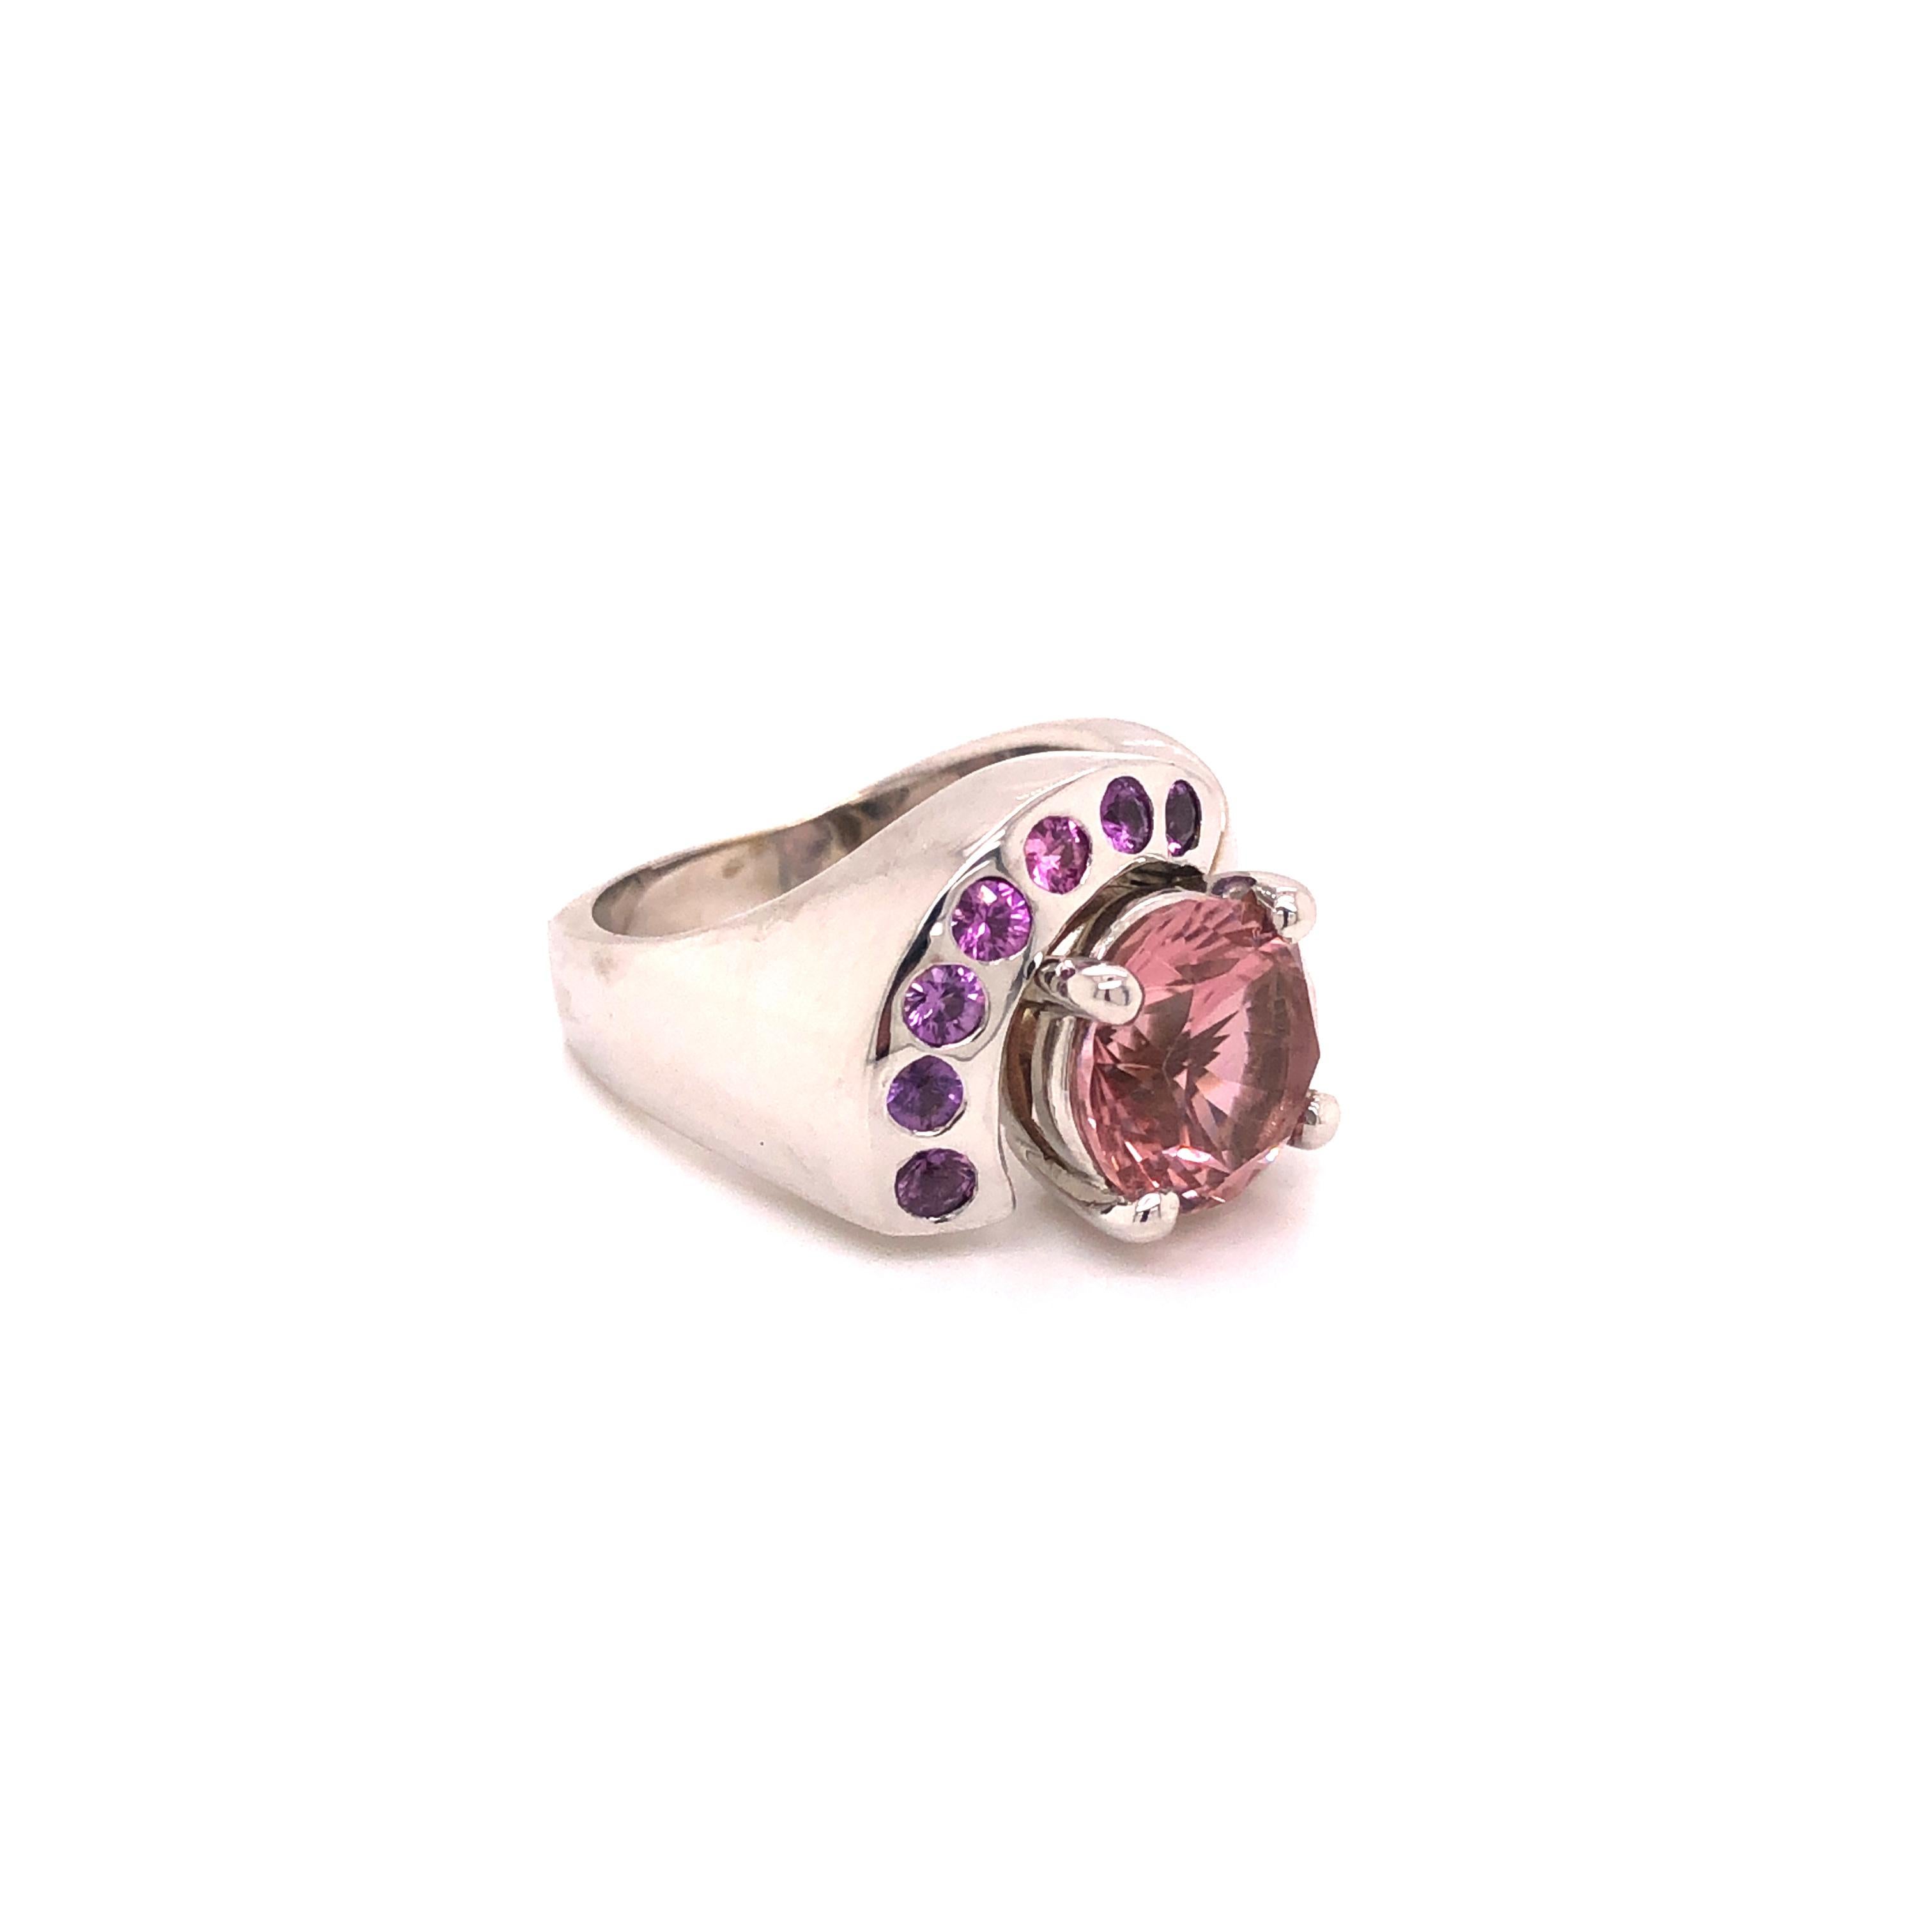 A vintage 14K white gold ring containing a round-cut pink tourmaline measuring 9.48 - 9.56 x 6.25 mm and weighing 3.26 carats, enhanced by round-shaped pink sapphires weighing a total of 0.50 carat.

Stone: Tourmaline, Pink Sapphire

Metal: 14K